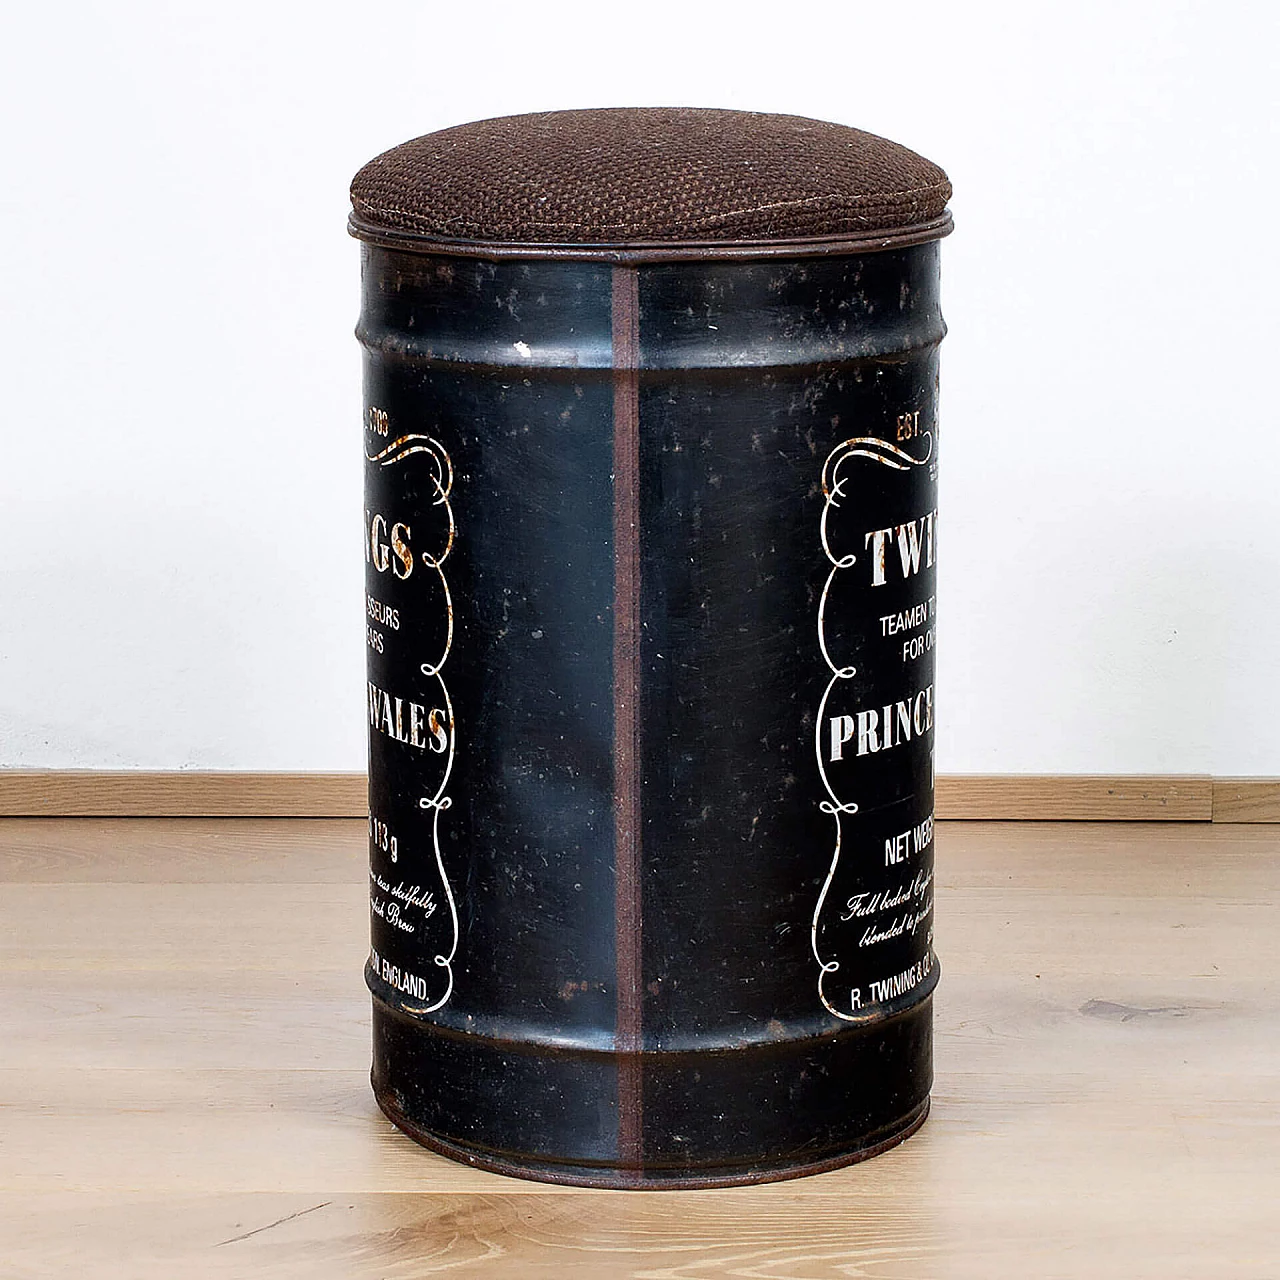 Industrial style stool made as a Twinings tea barrel, 70s or 80s 1113128